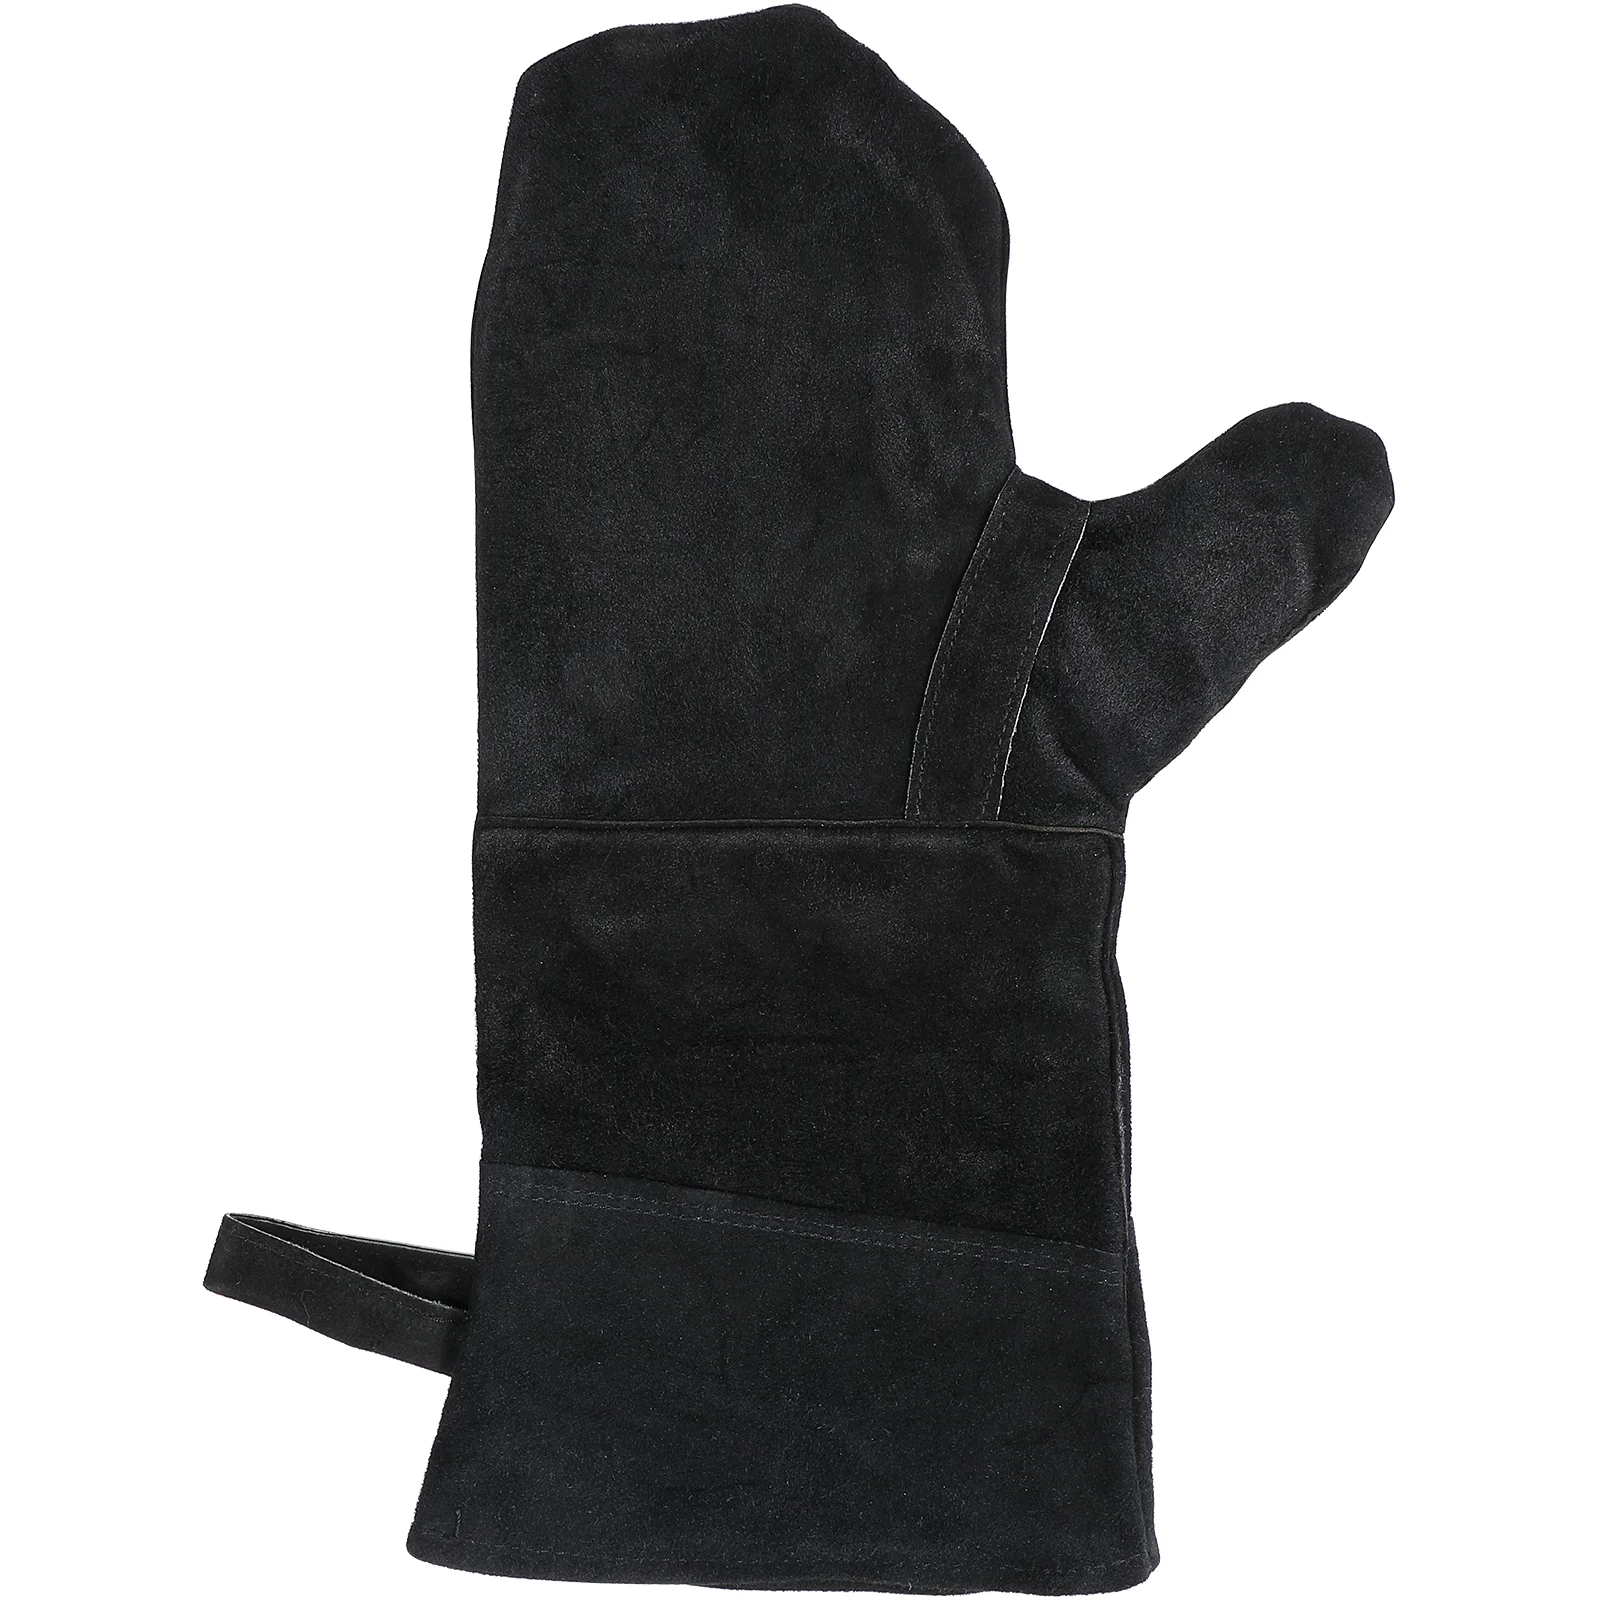 

Baking Gloves Heat Resistant Insulation Gloves Stove Oven Welding Gloves for Home Outdoor BBQ Use